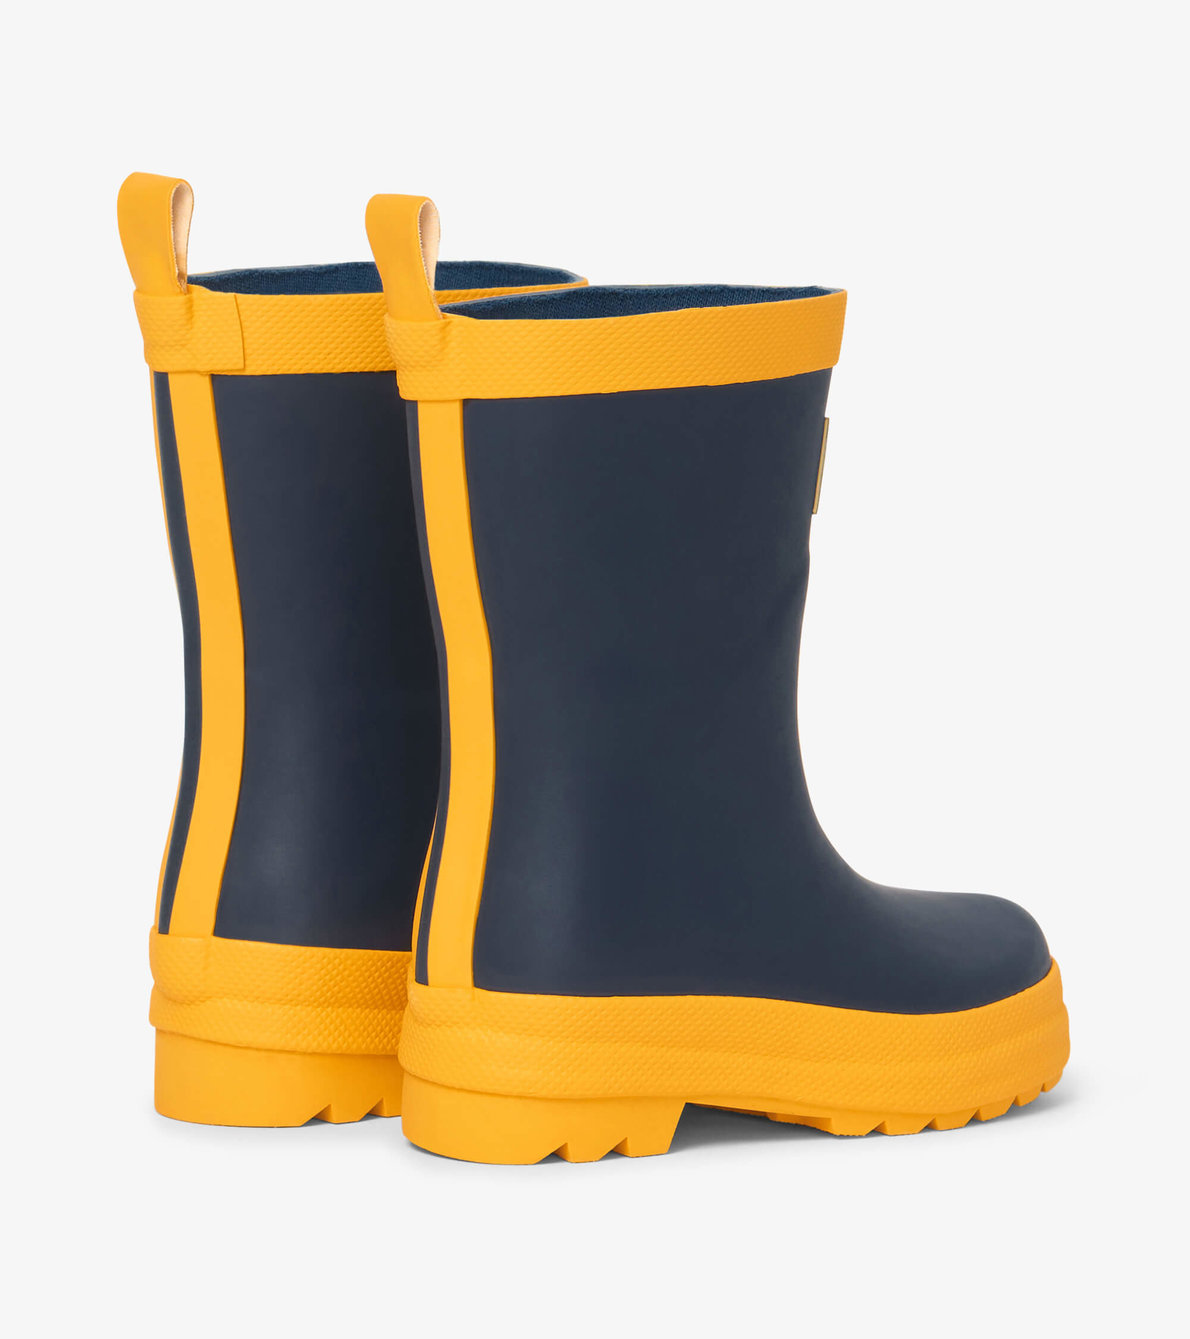 View larger image of My 1st Rain Boots - Navy and Yellow